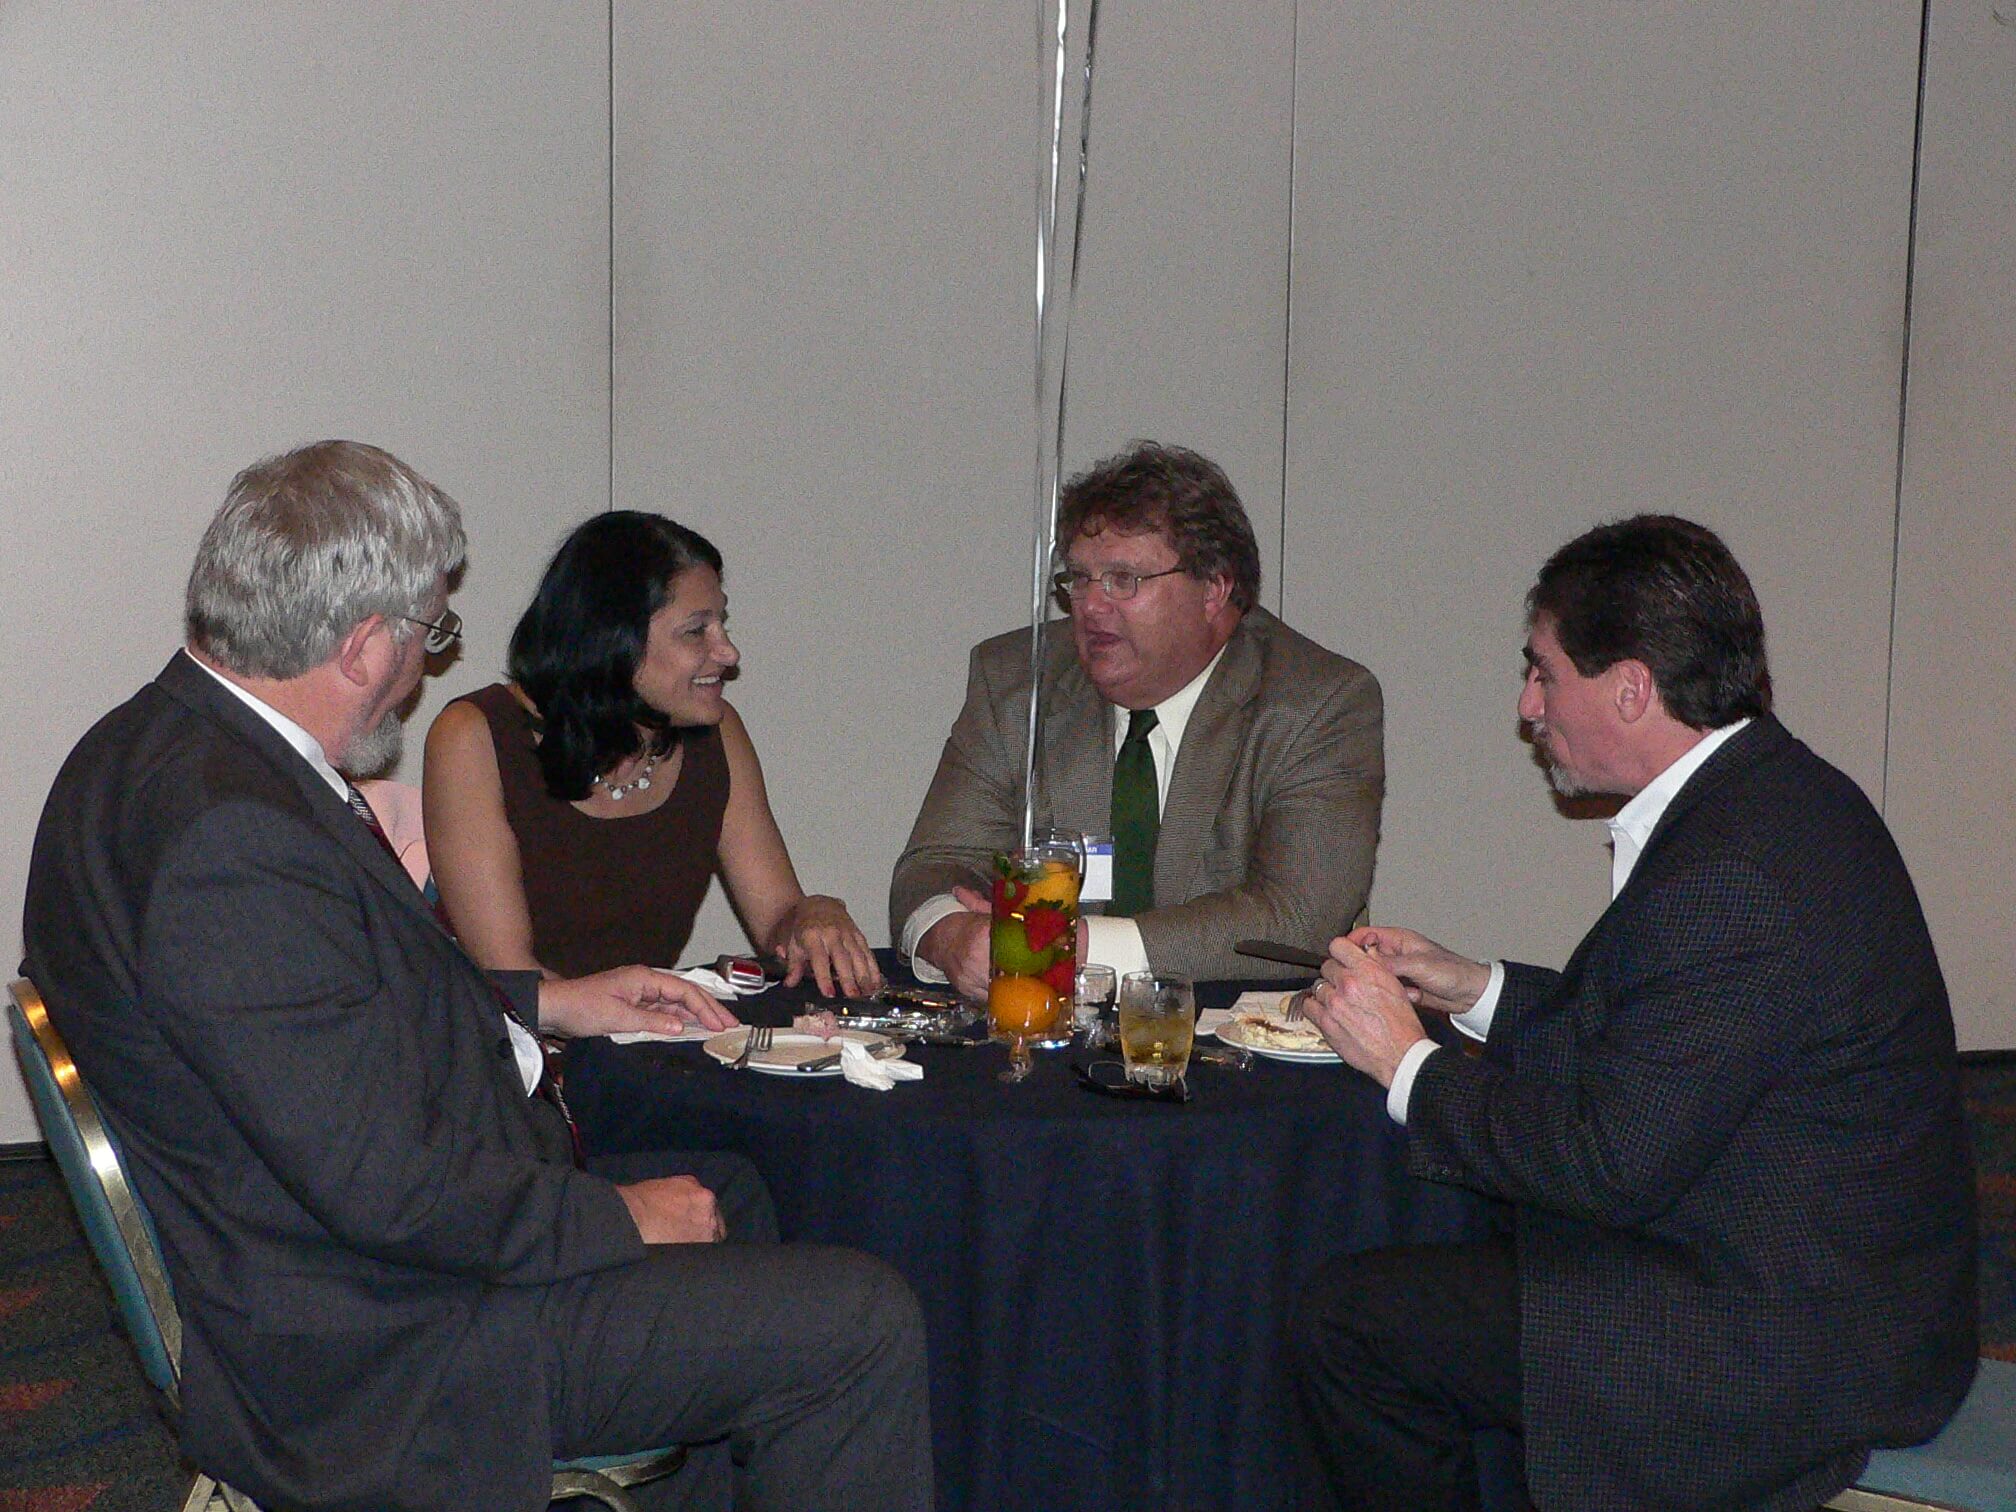 4 lawyers at CLS 30th Anniversary eating